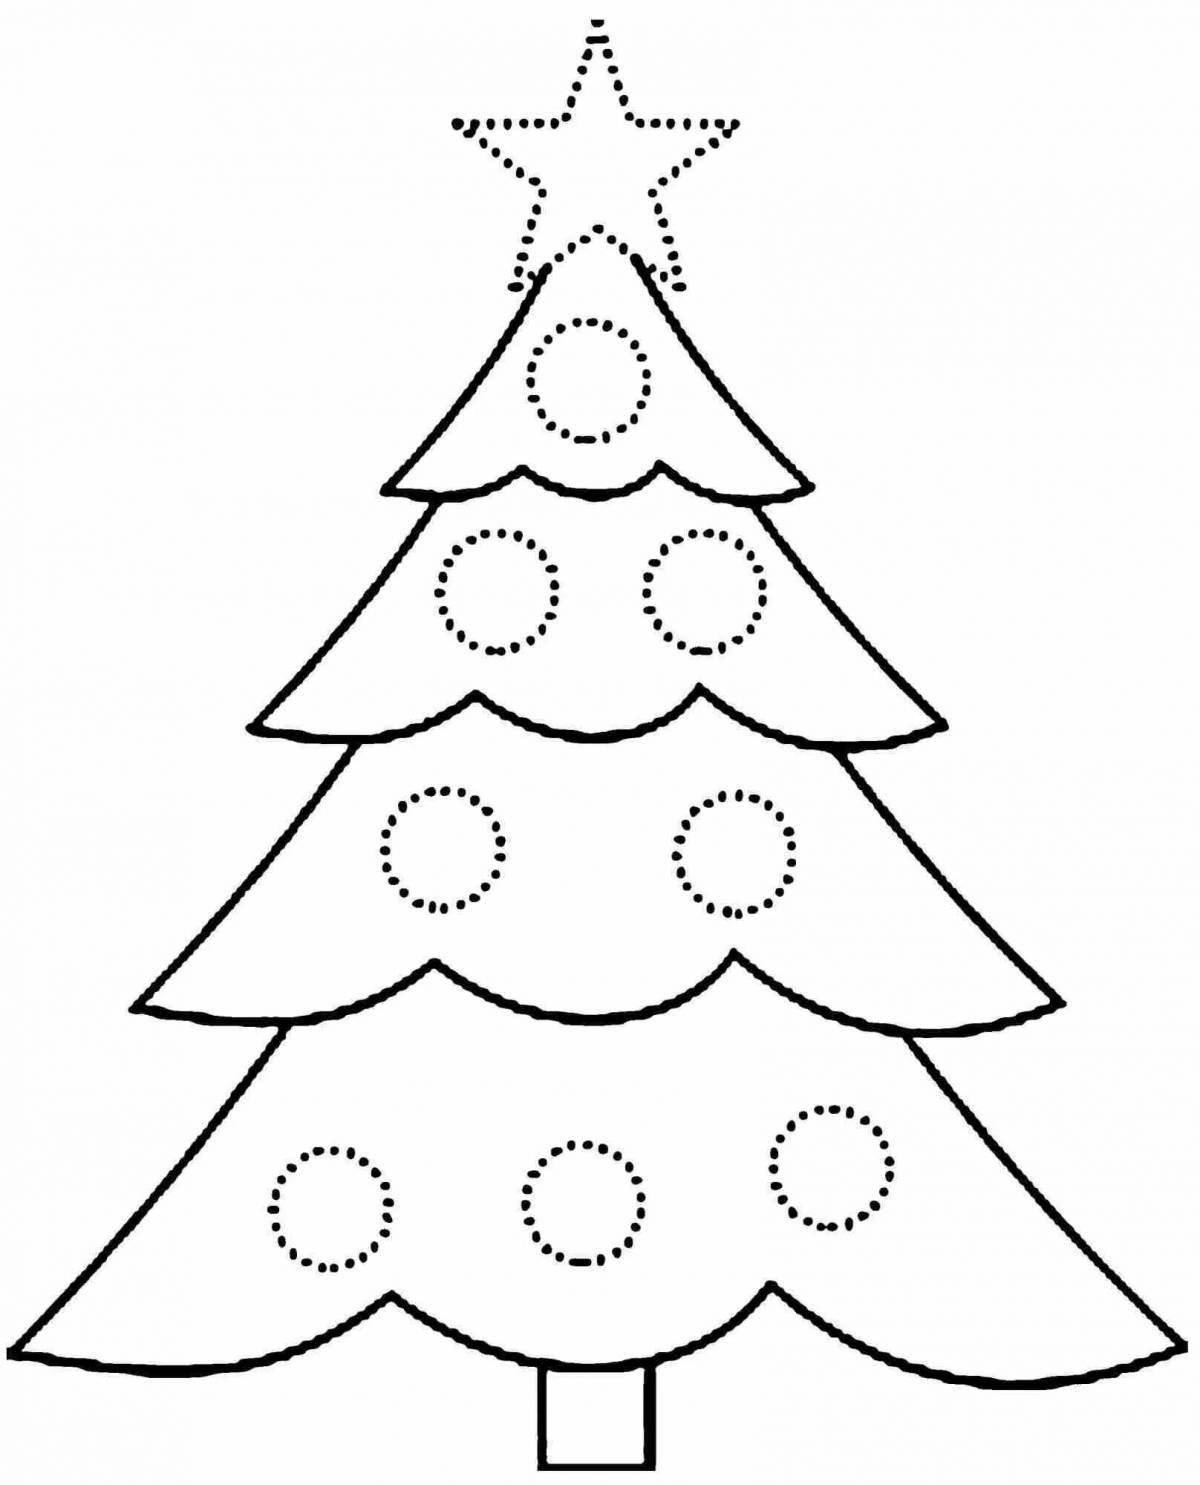 Magic Christmas tree with balls for children